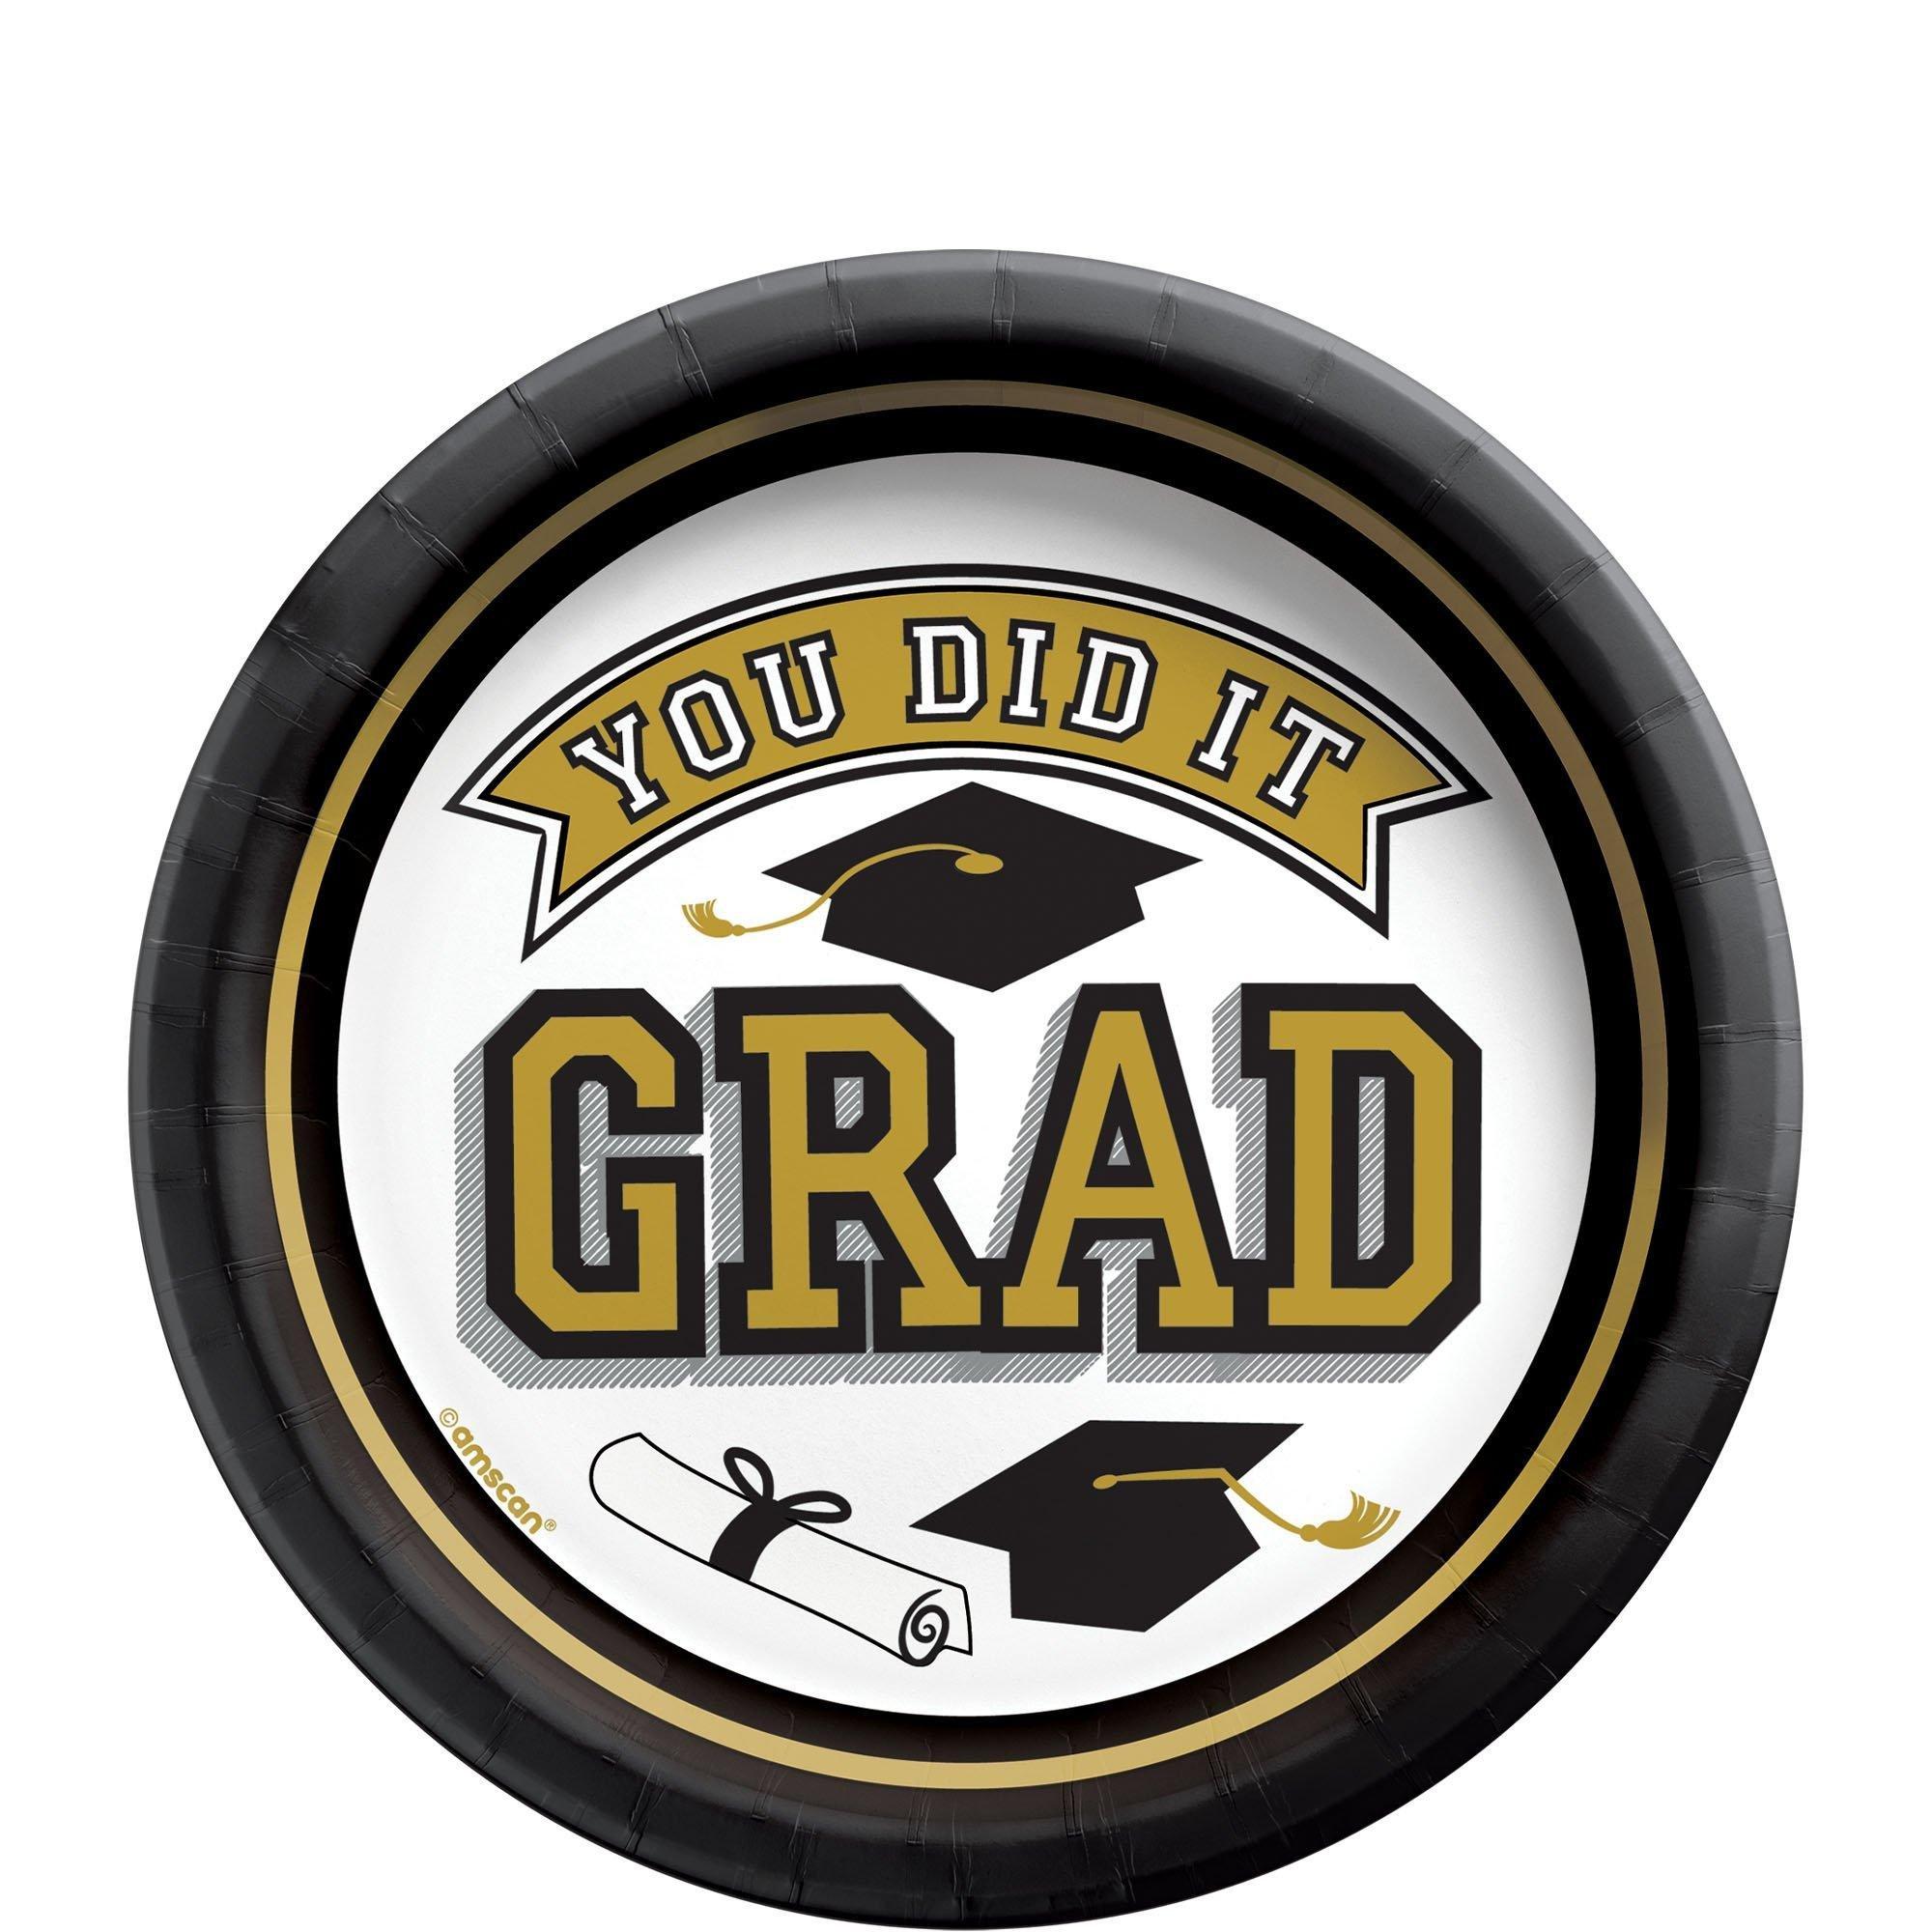 Graduation Party Supplies Kit for 20 with Decorations, Banners, Balloons, Plates, Napkins, Cups - Black, Silver & Gold Celebrate the Grad